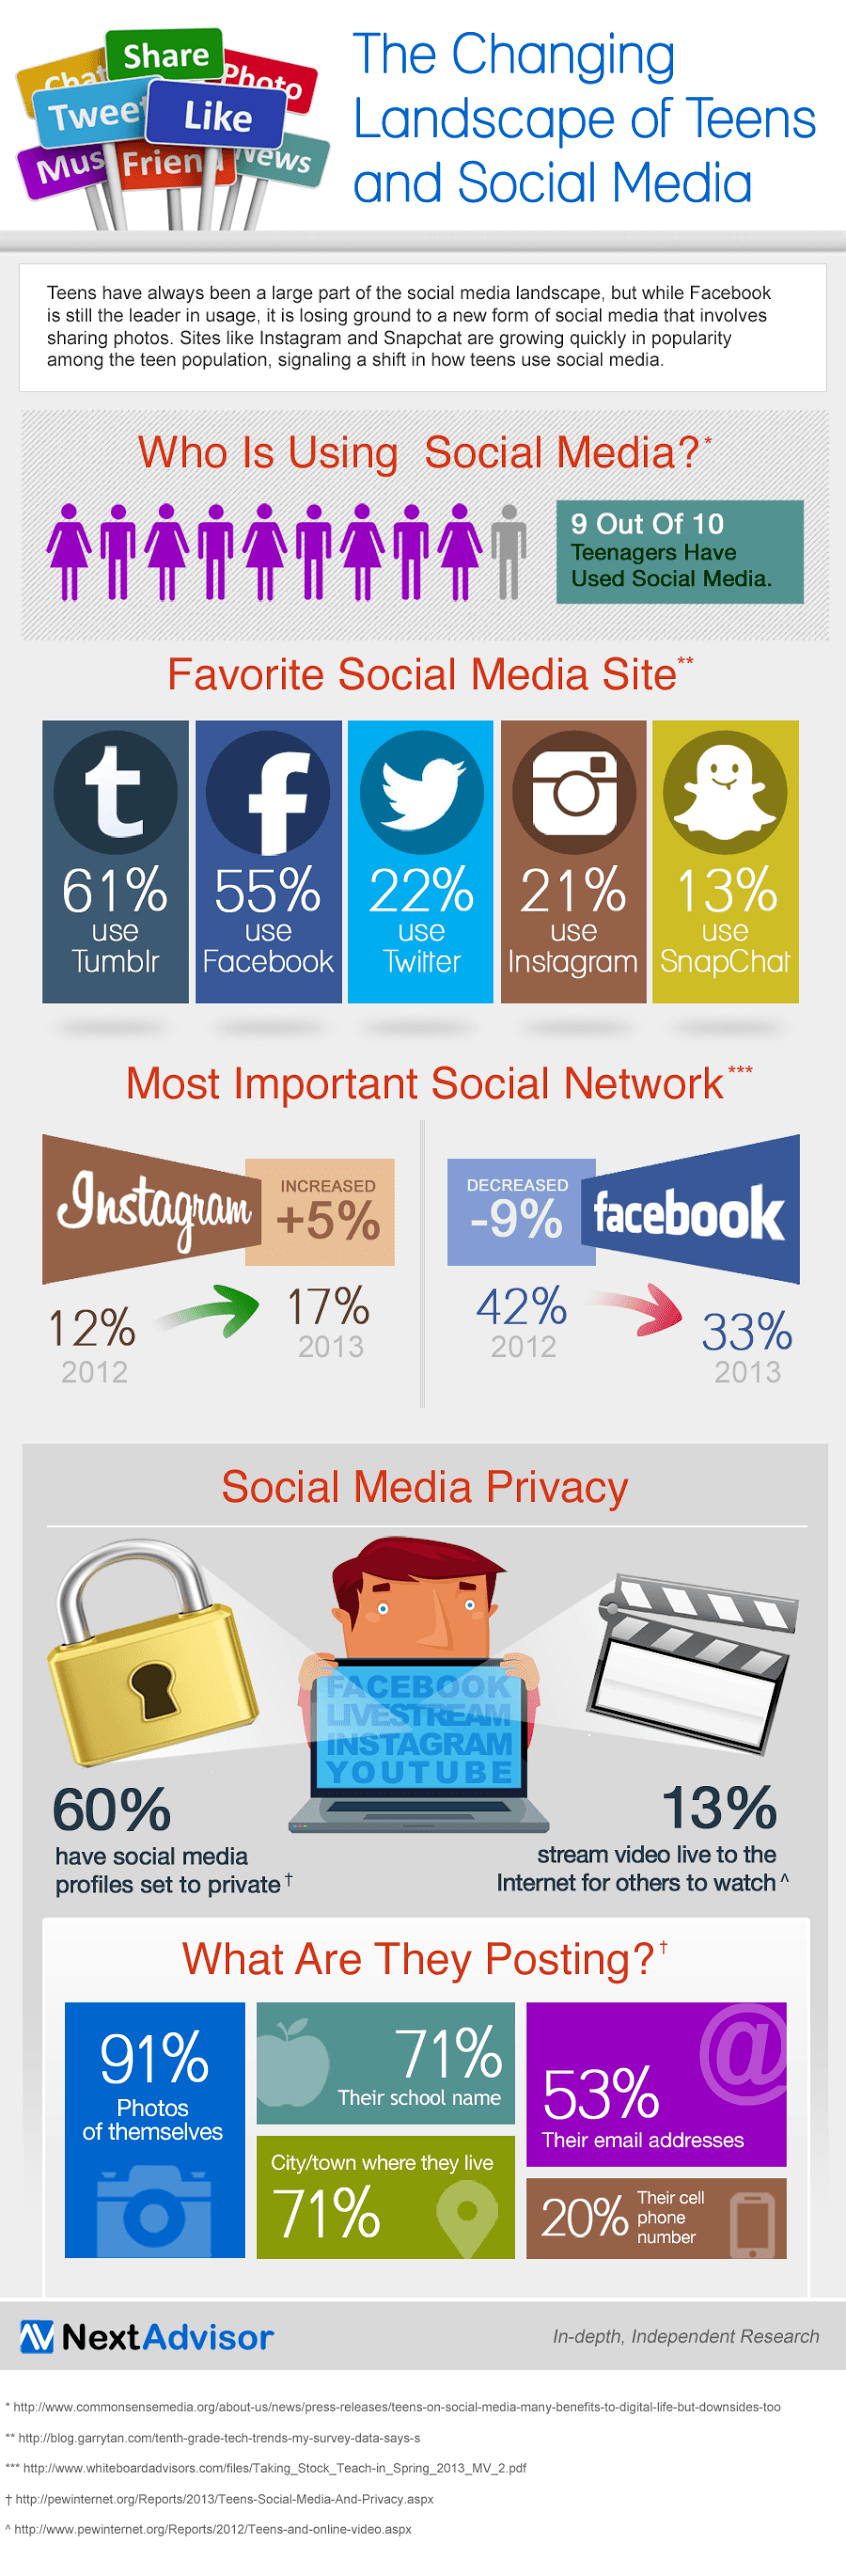 The Changing Landscape of Teens and Social Media Infographic